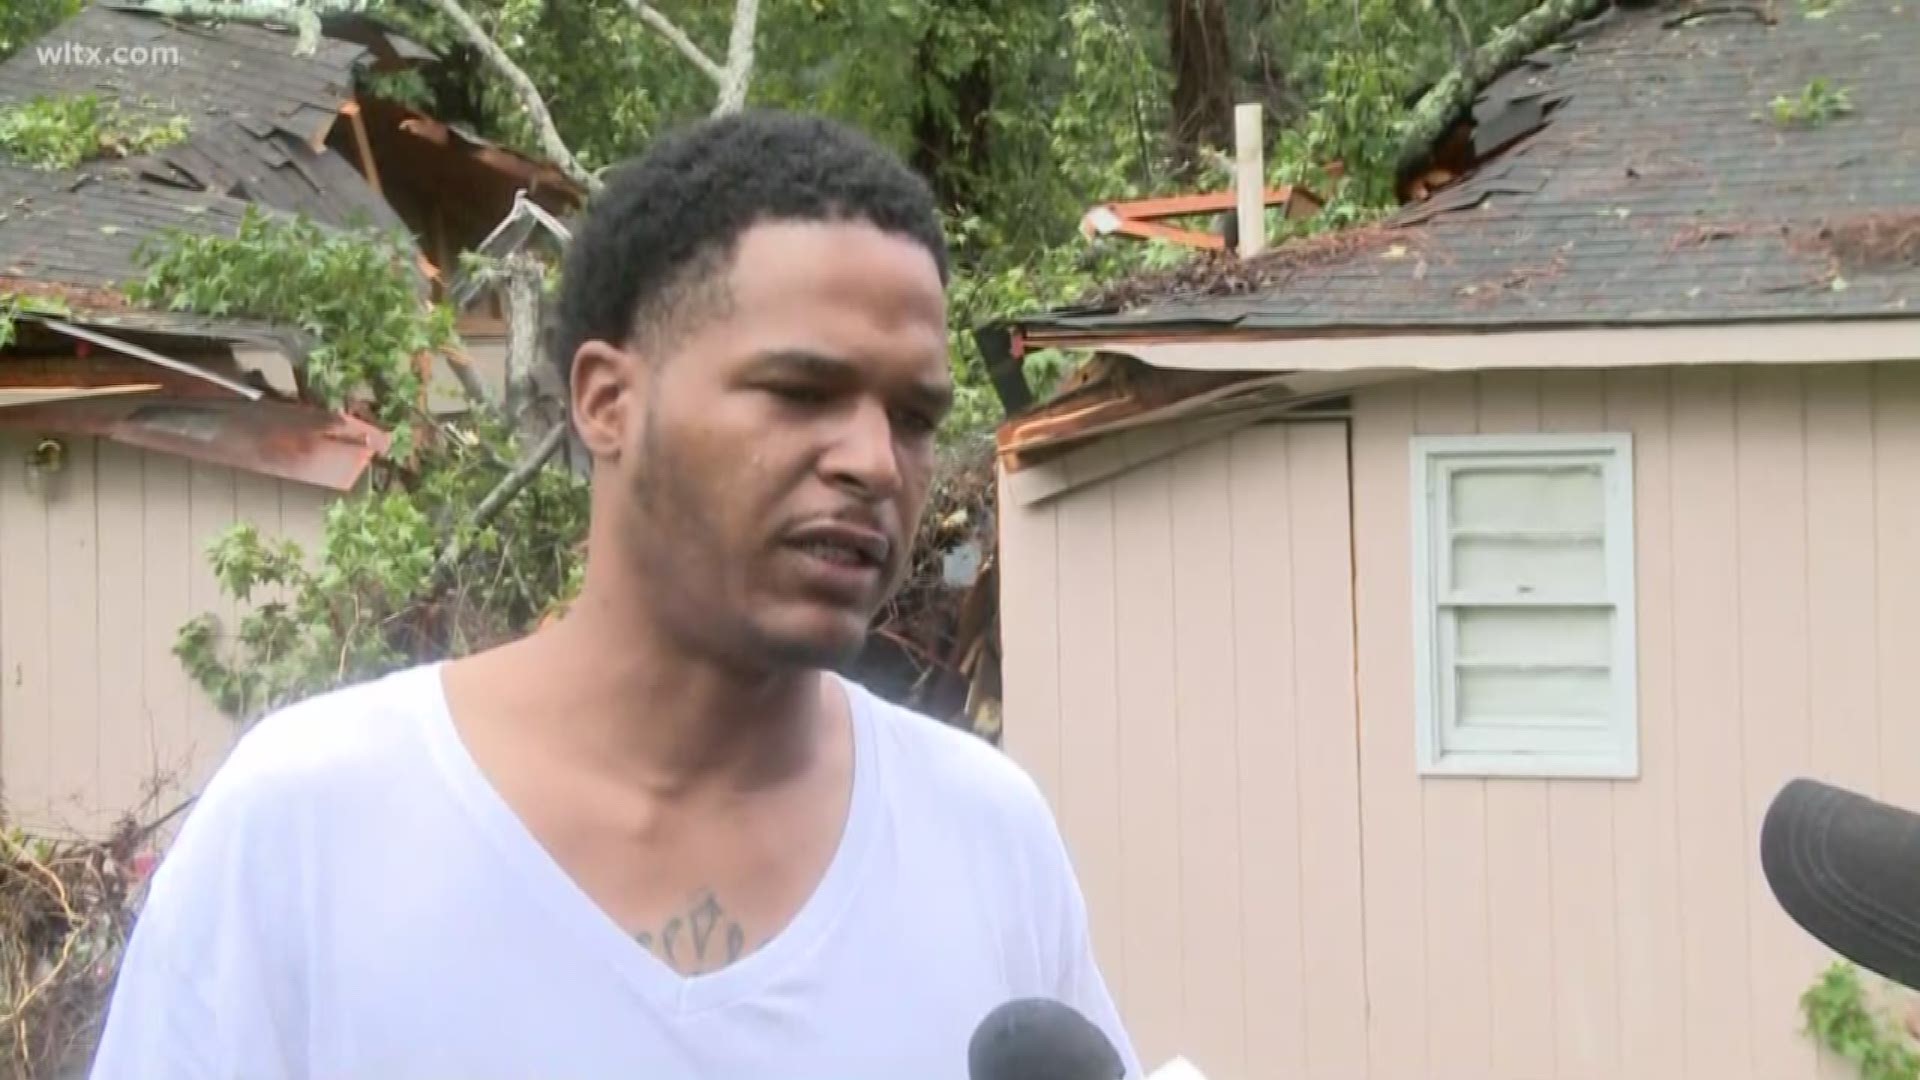 A tree fell on a Columbia home during Tropical Storm Michael, trapping someone inside the house.